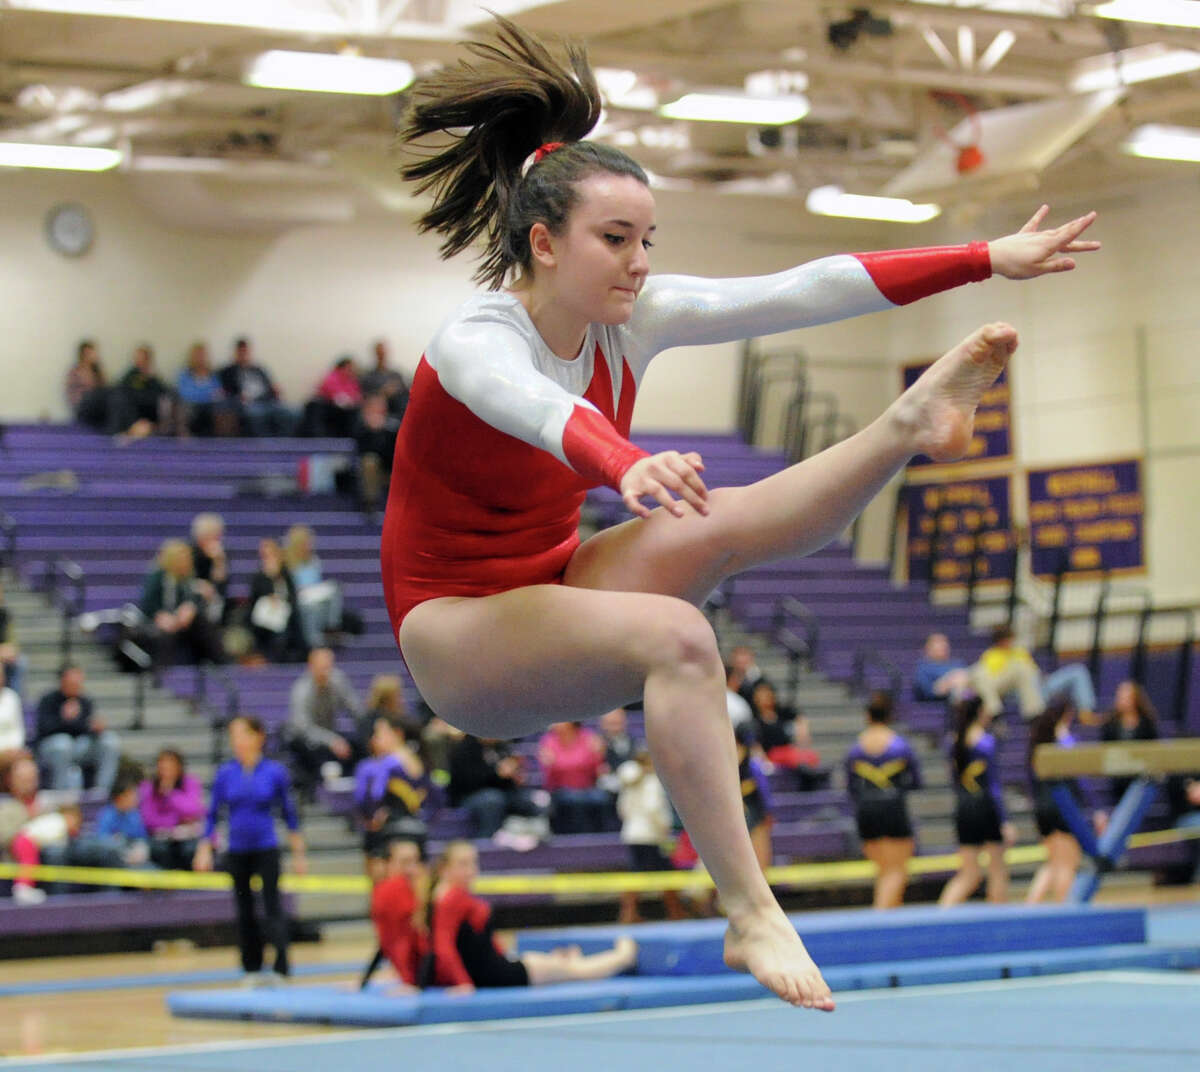 Emily Clarke of Greenwich High School competes in the floor exercise during the 2013 FCIAC Girls Gymnastics Championships at Westhill High School in Stamford, Saturday, Feb. 16, 2013.